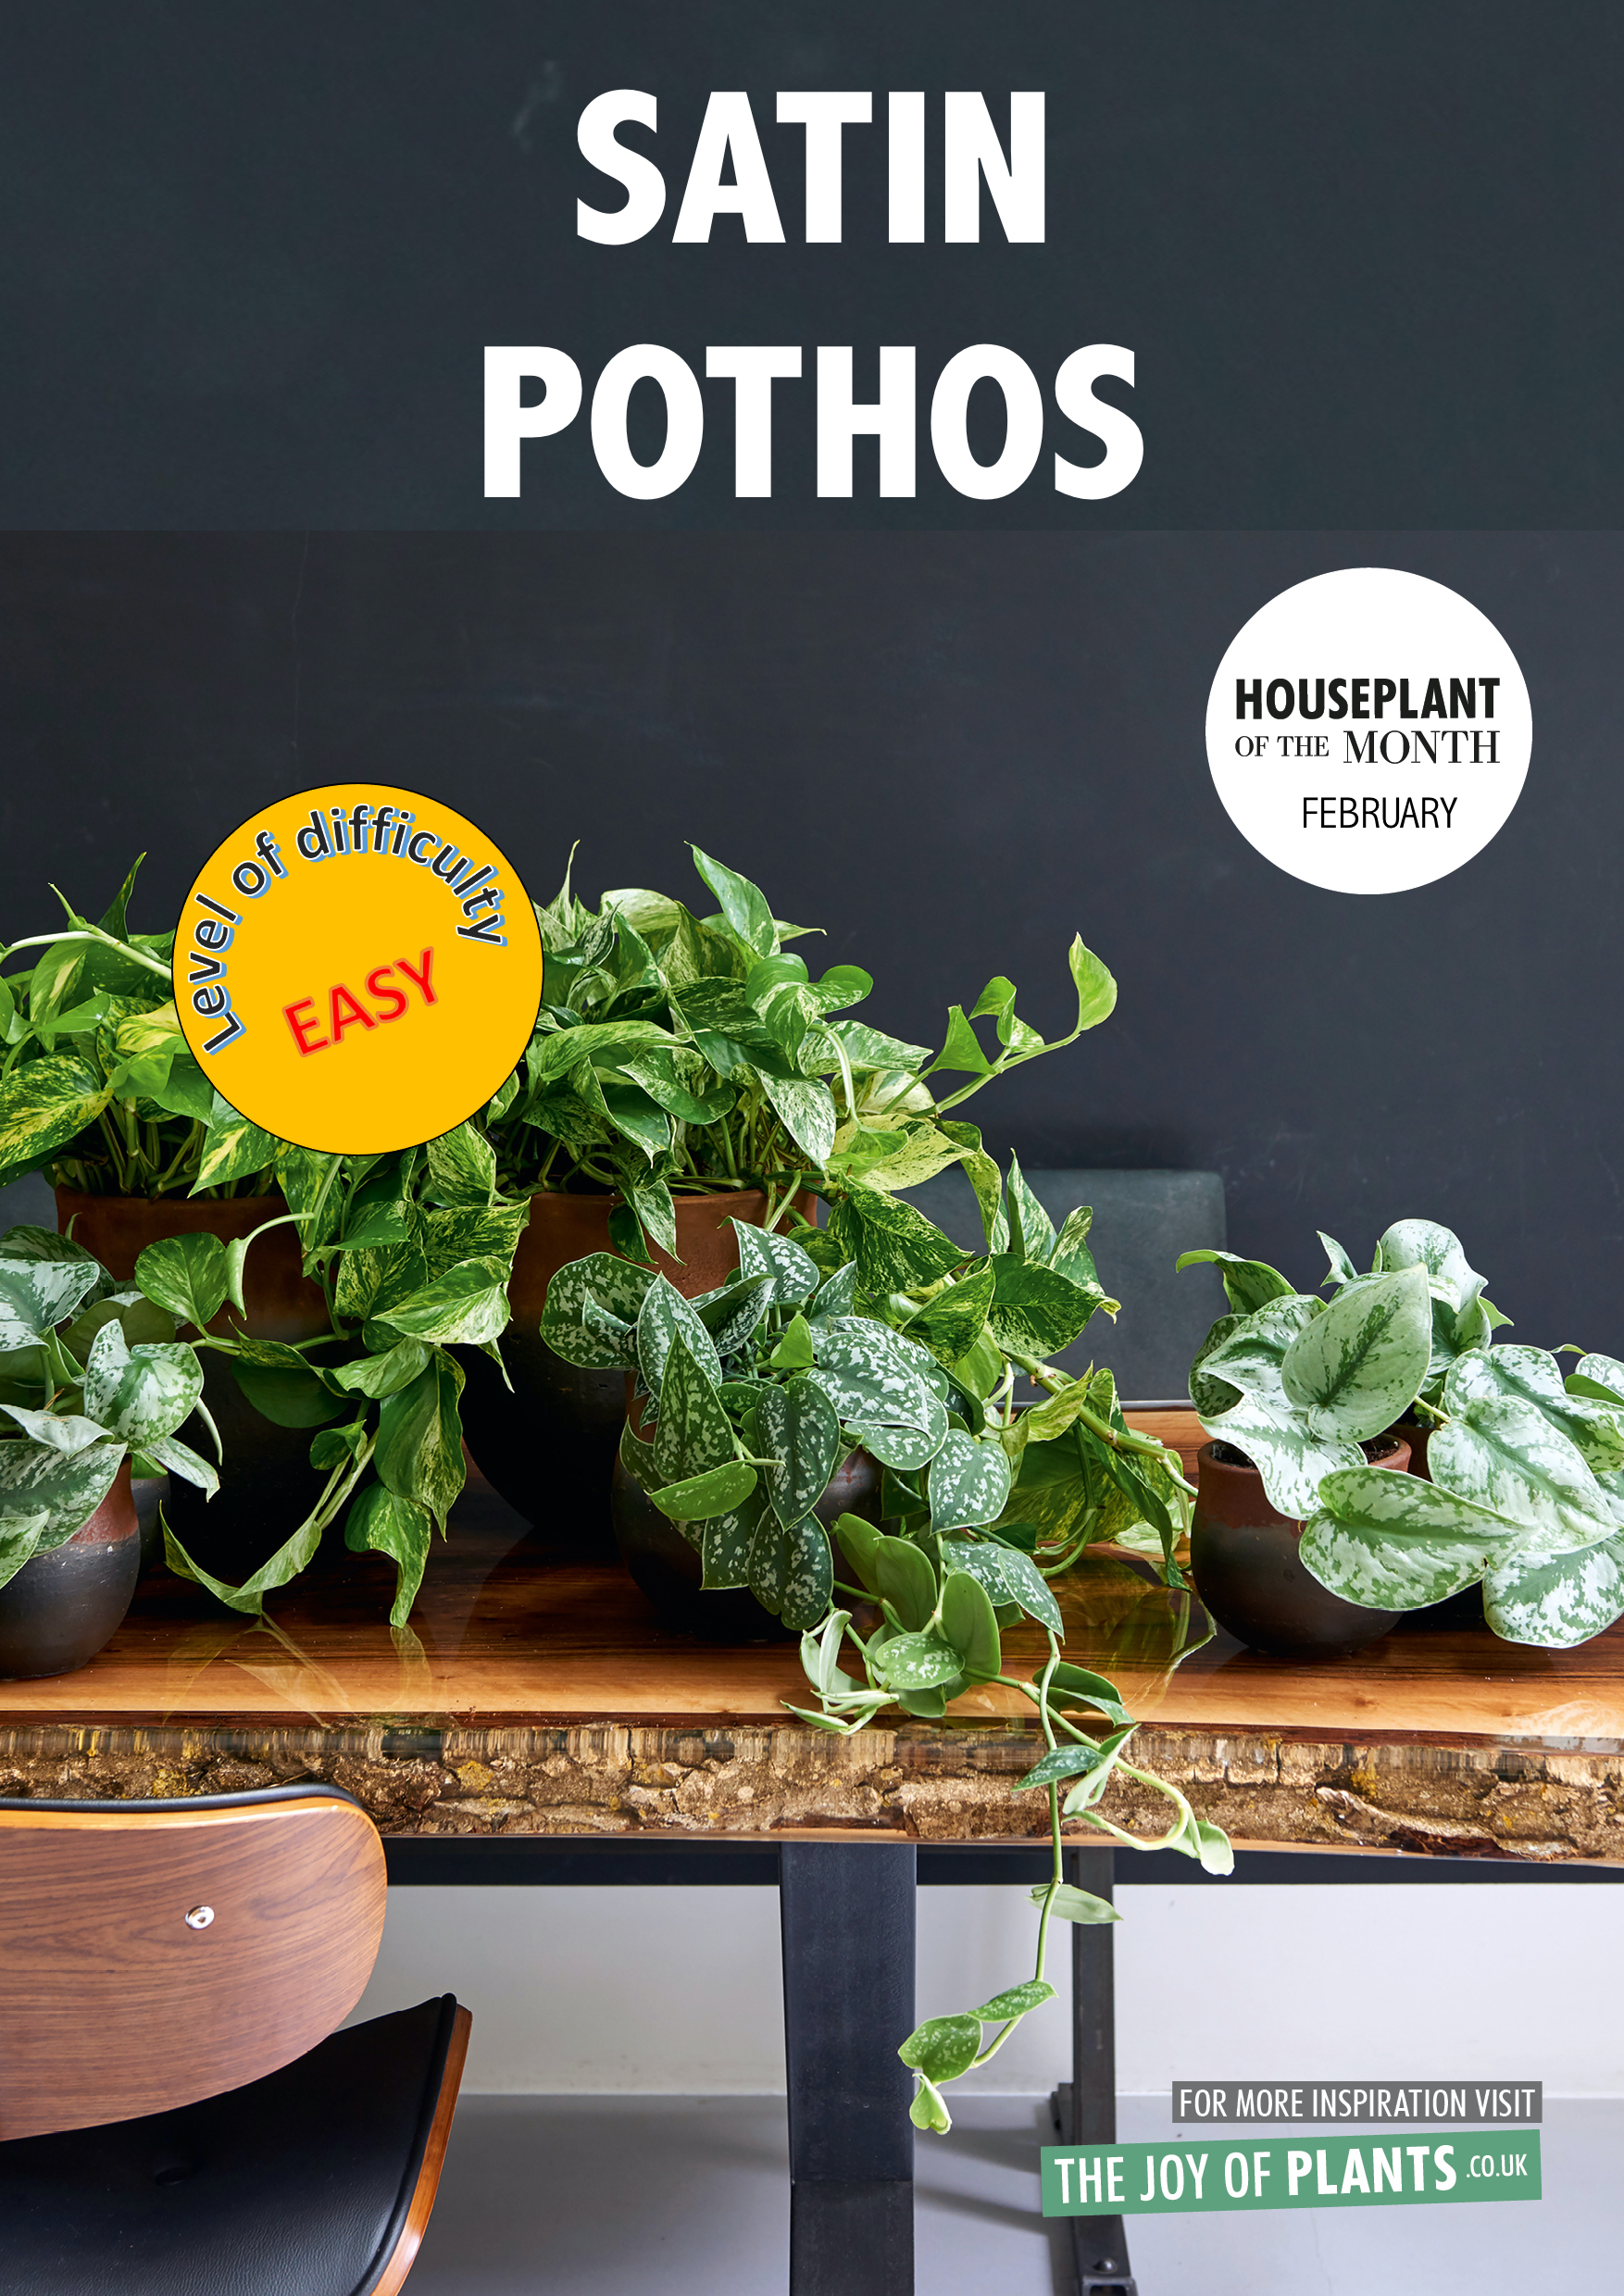 poster showing different cultivars of satin pothos on a wooden table